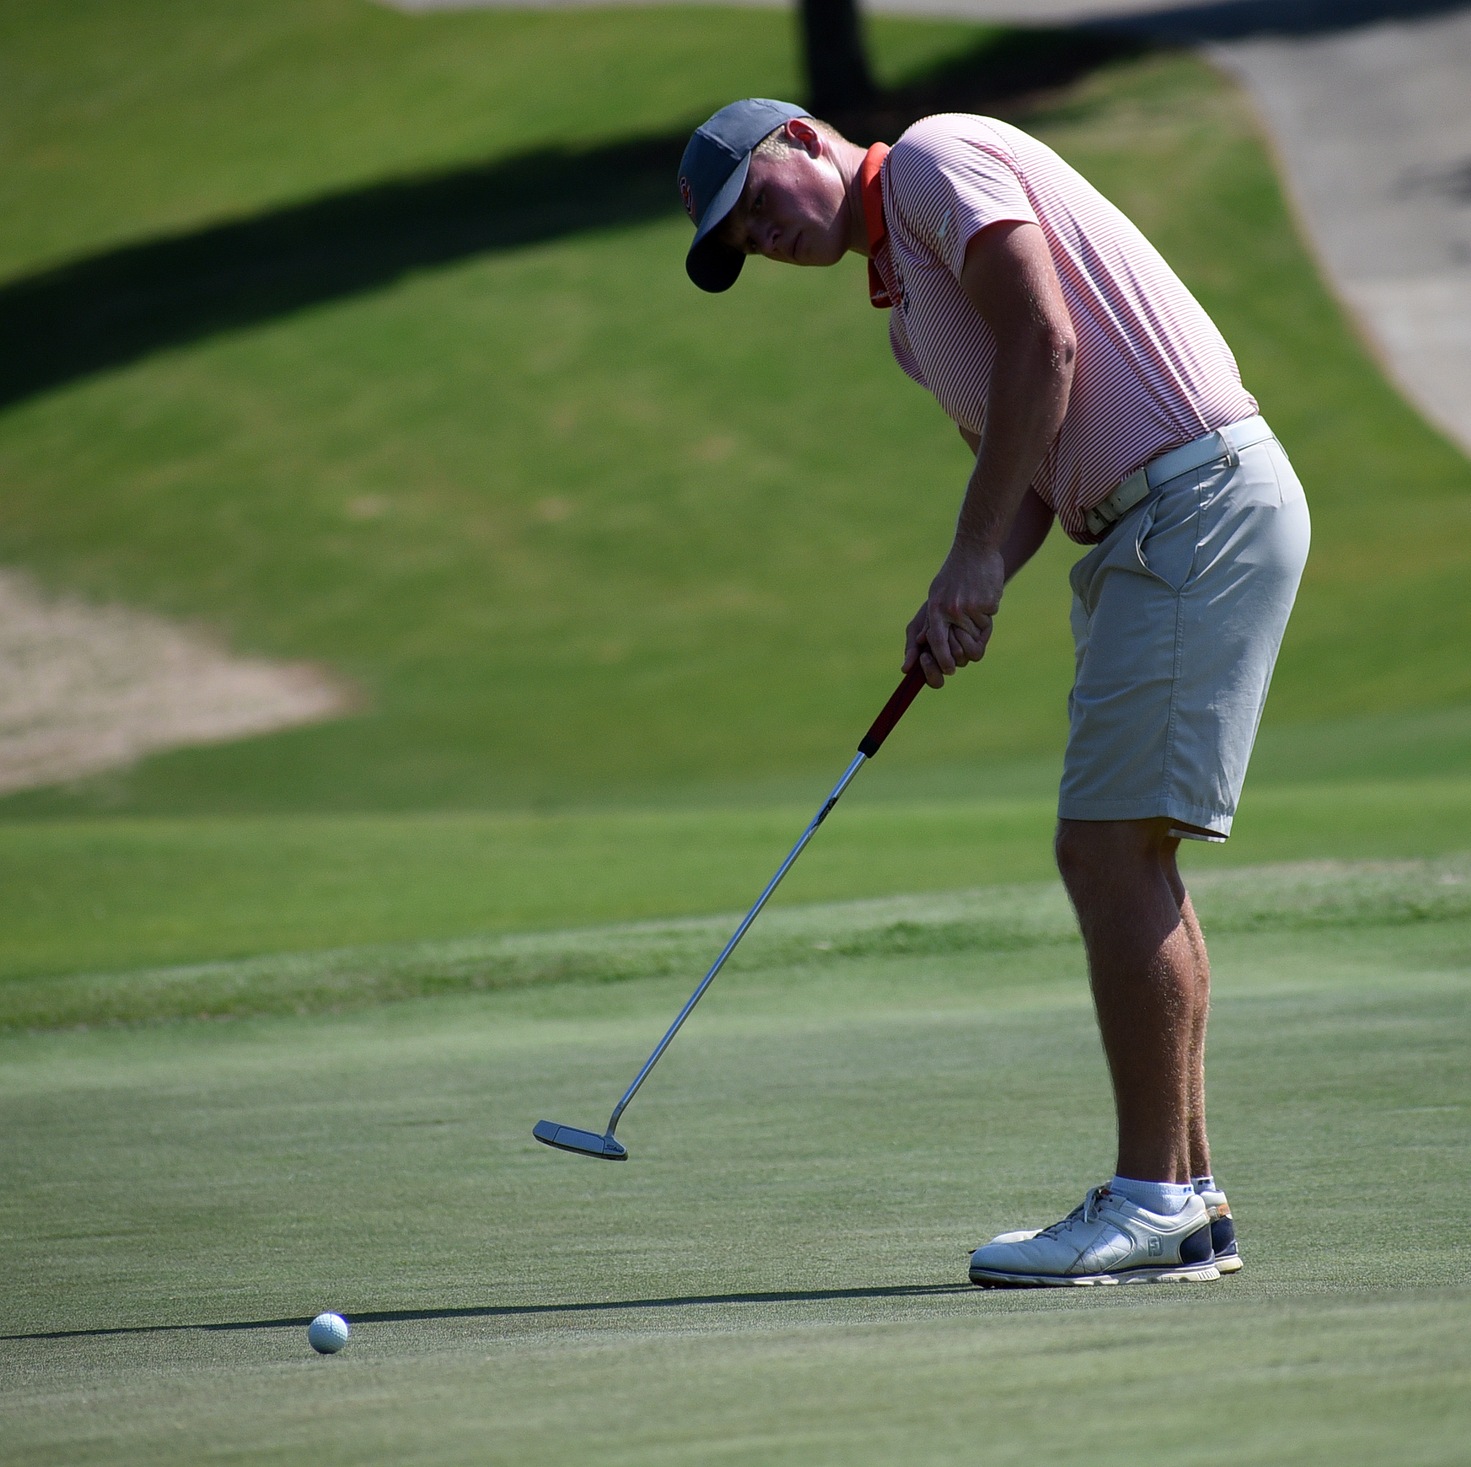 Forster sits in tie for 69th after day one at NCAA Finals